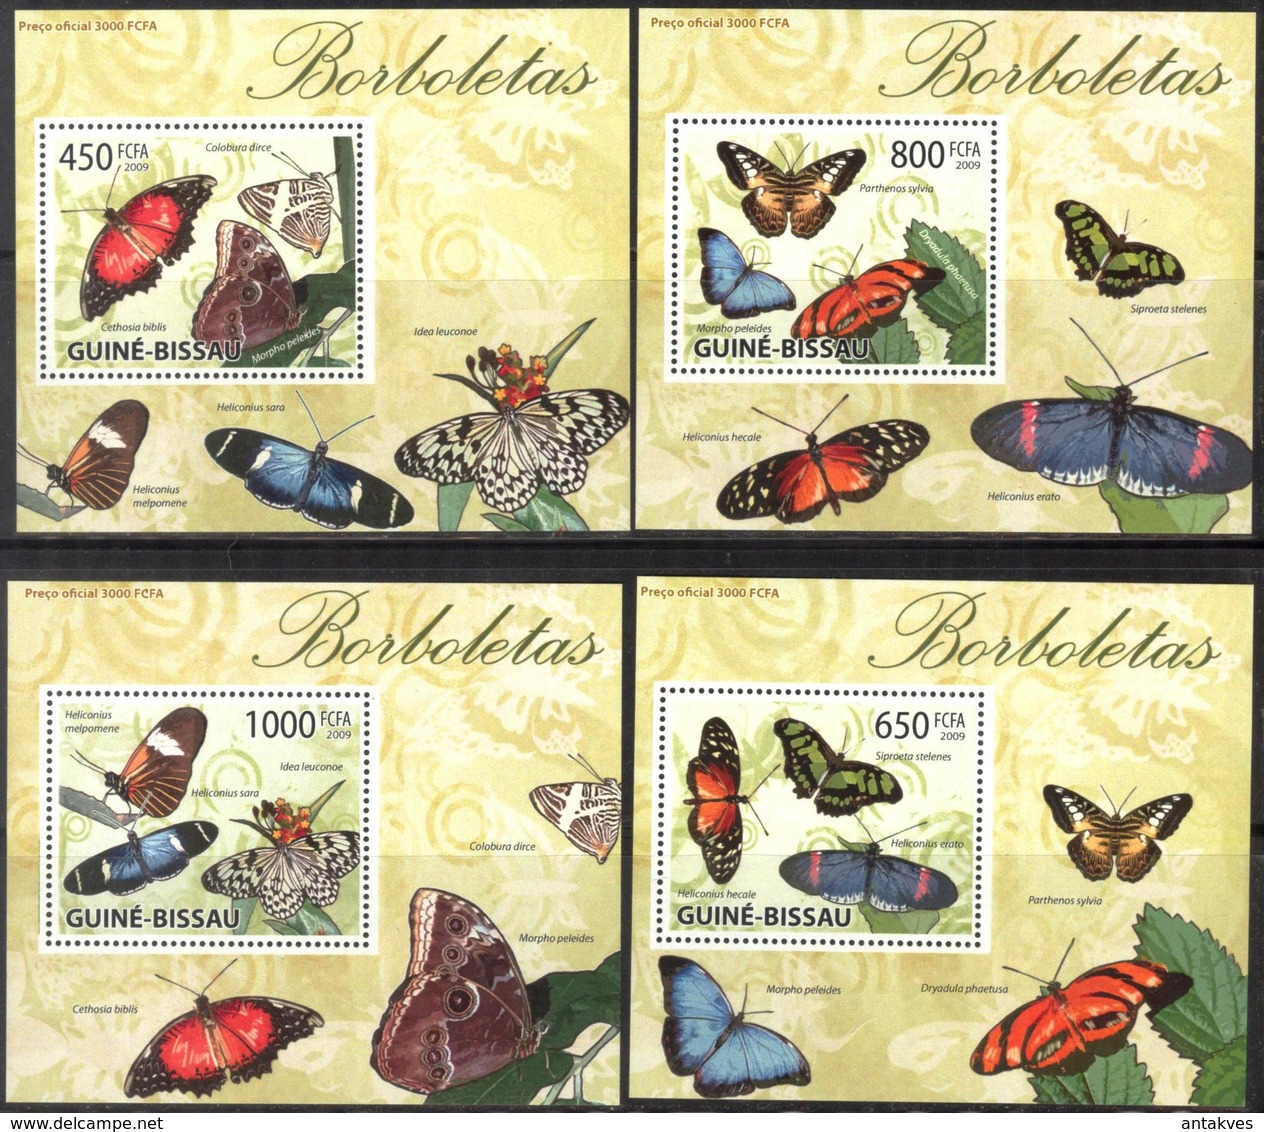 A{264} Guinea Bissau 2009 Butterflies 4 S/S Deluxe MNH** - Guinea-Bissau